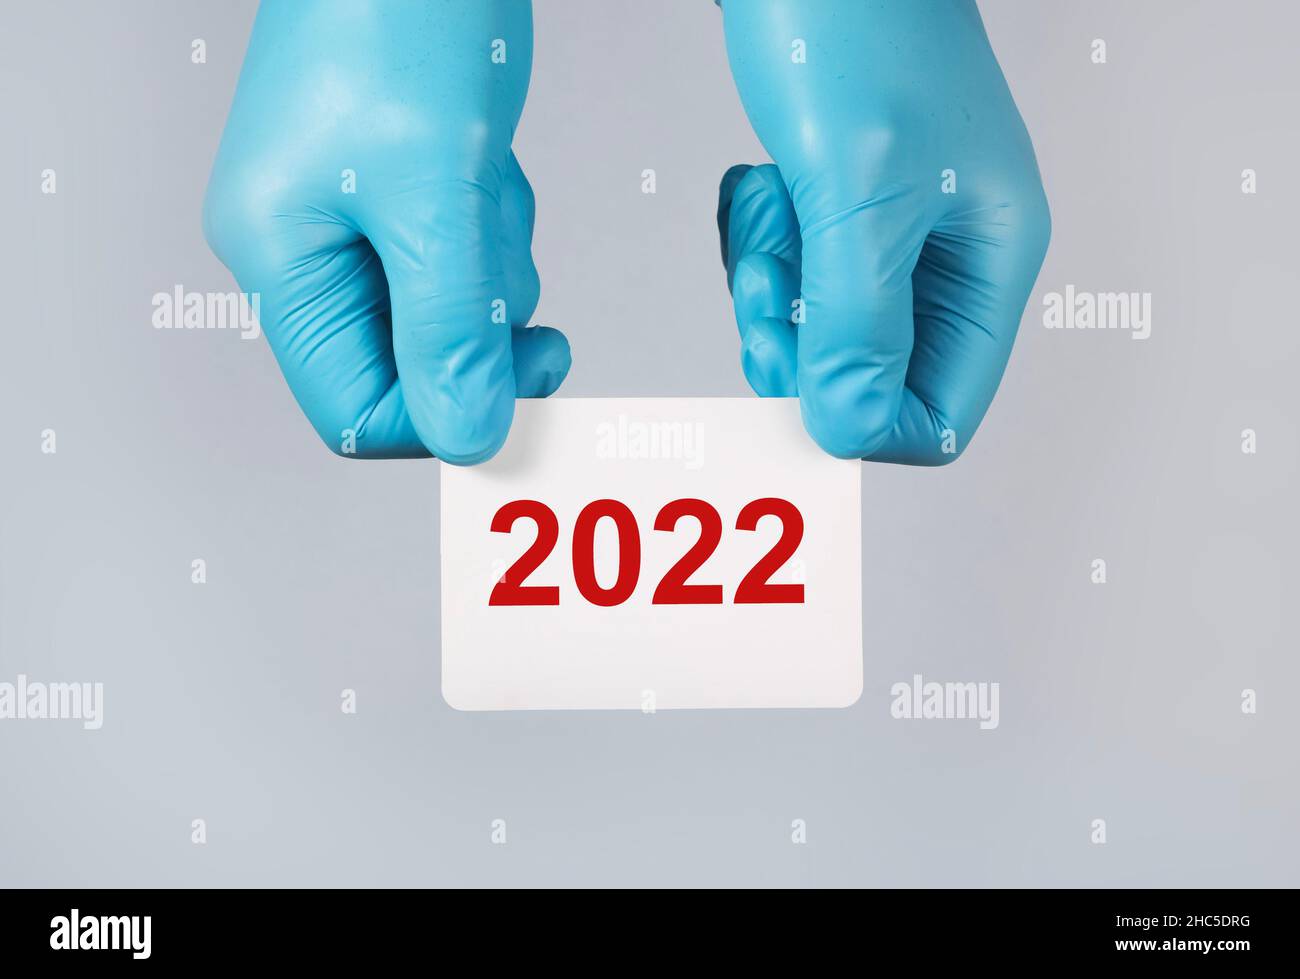 2022 new year, medical concept in hands over background. Stock Photo